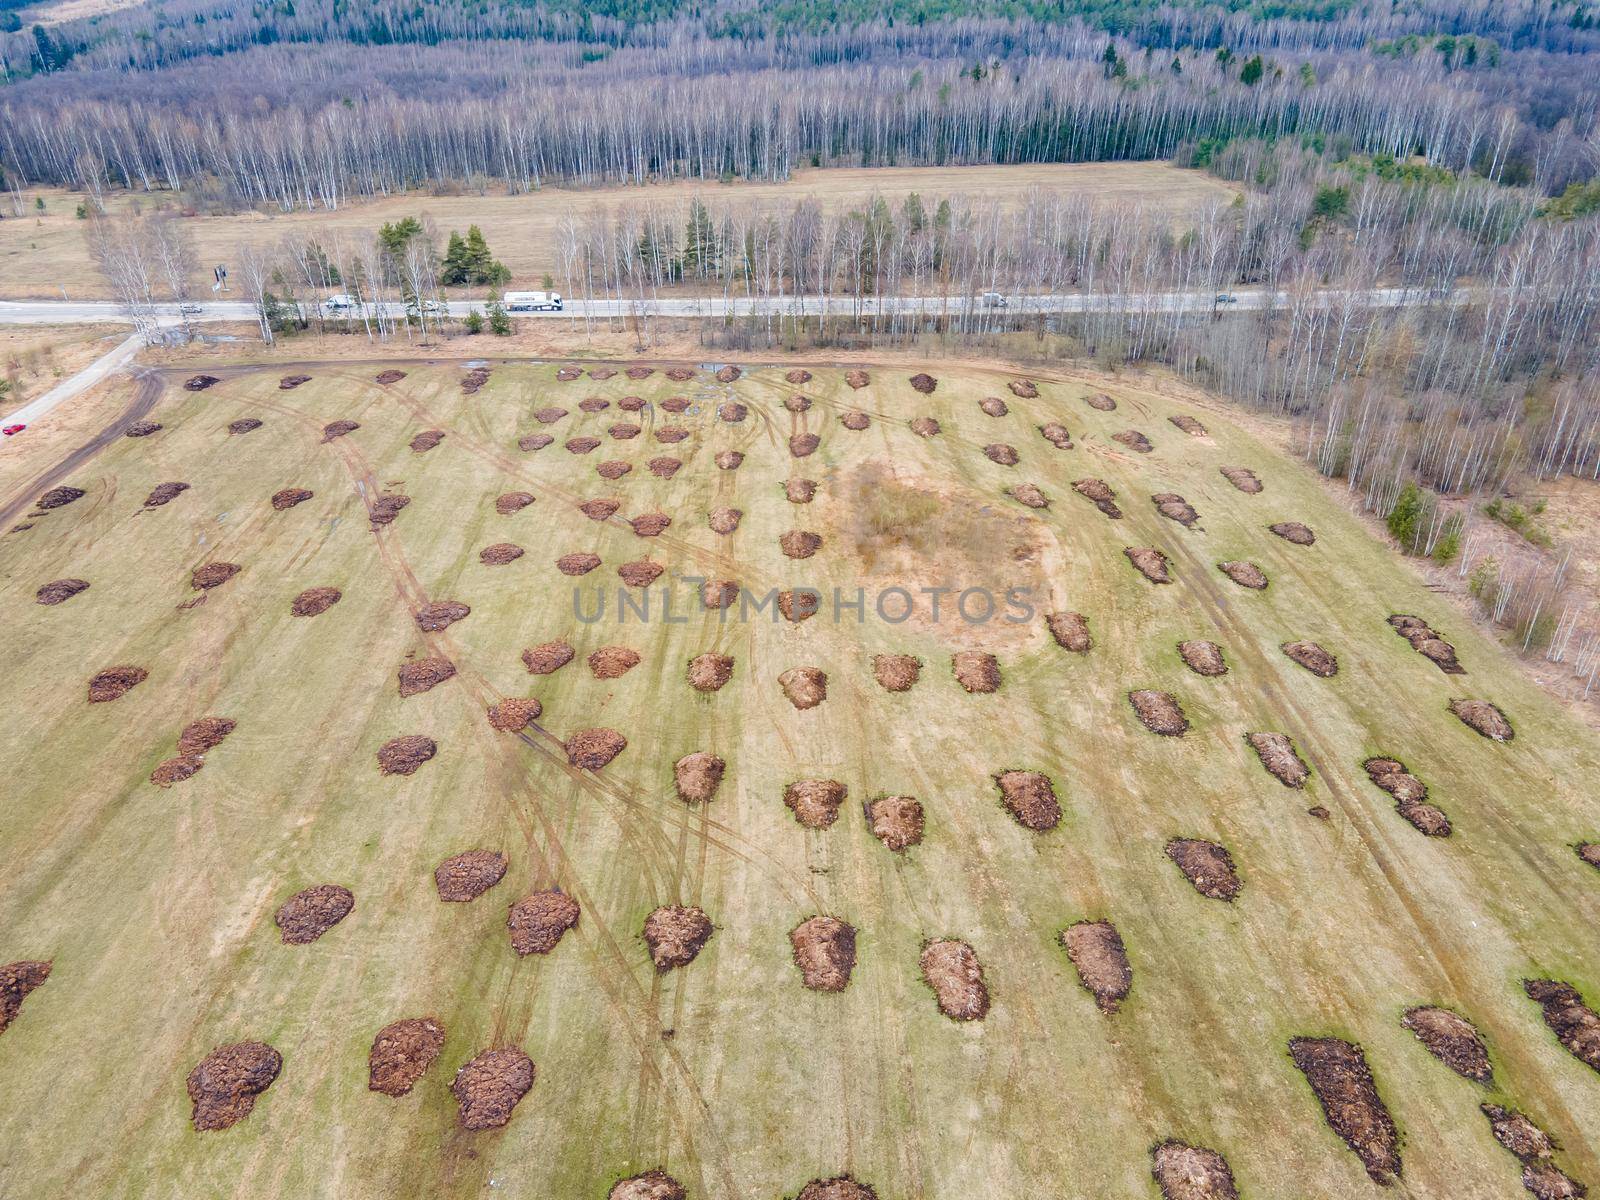 Manure heaps lie in even rows on a farm field, aerial photo. Application of organic fertilizers in spring and autumn. The concept of working in agriculture for doing business and making a profit.